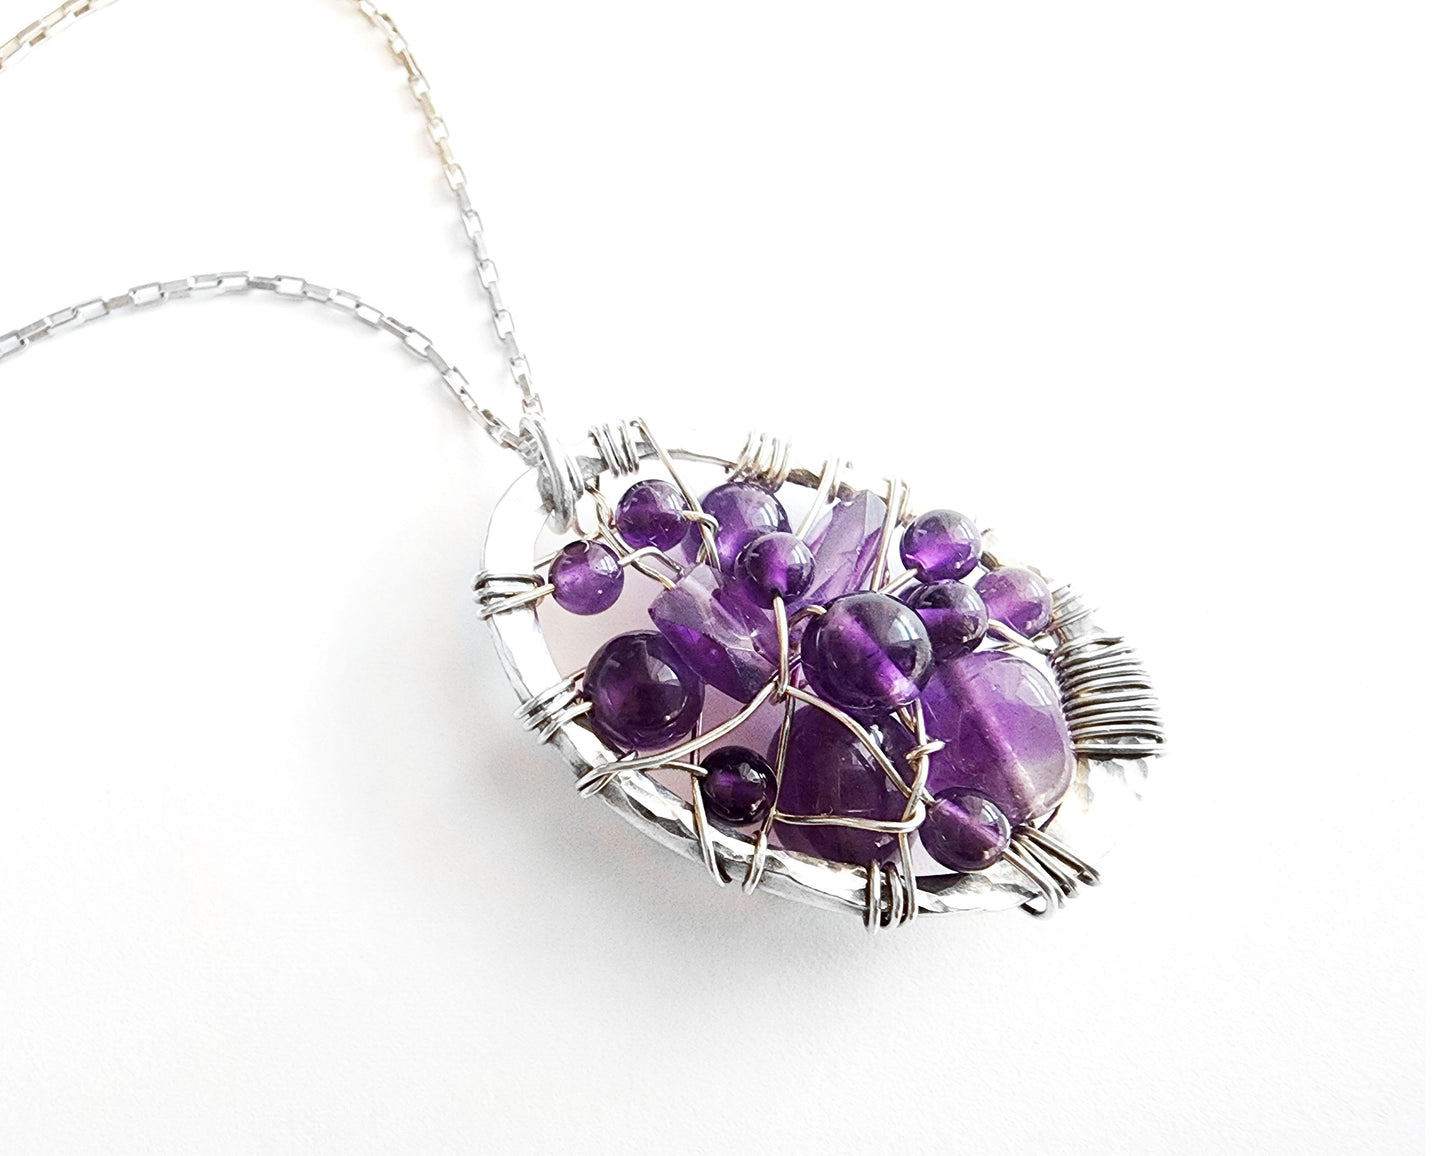 Oval shaped Sterling Silver Amethyst pendant woven with purple gemstones and Sterling Silver wire, pendant on chain.